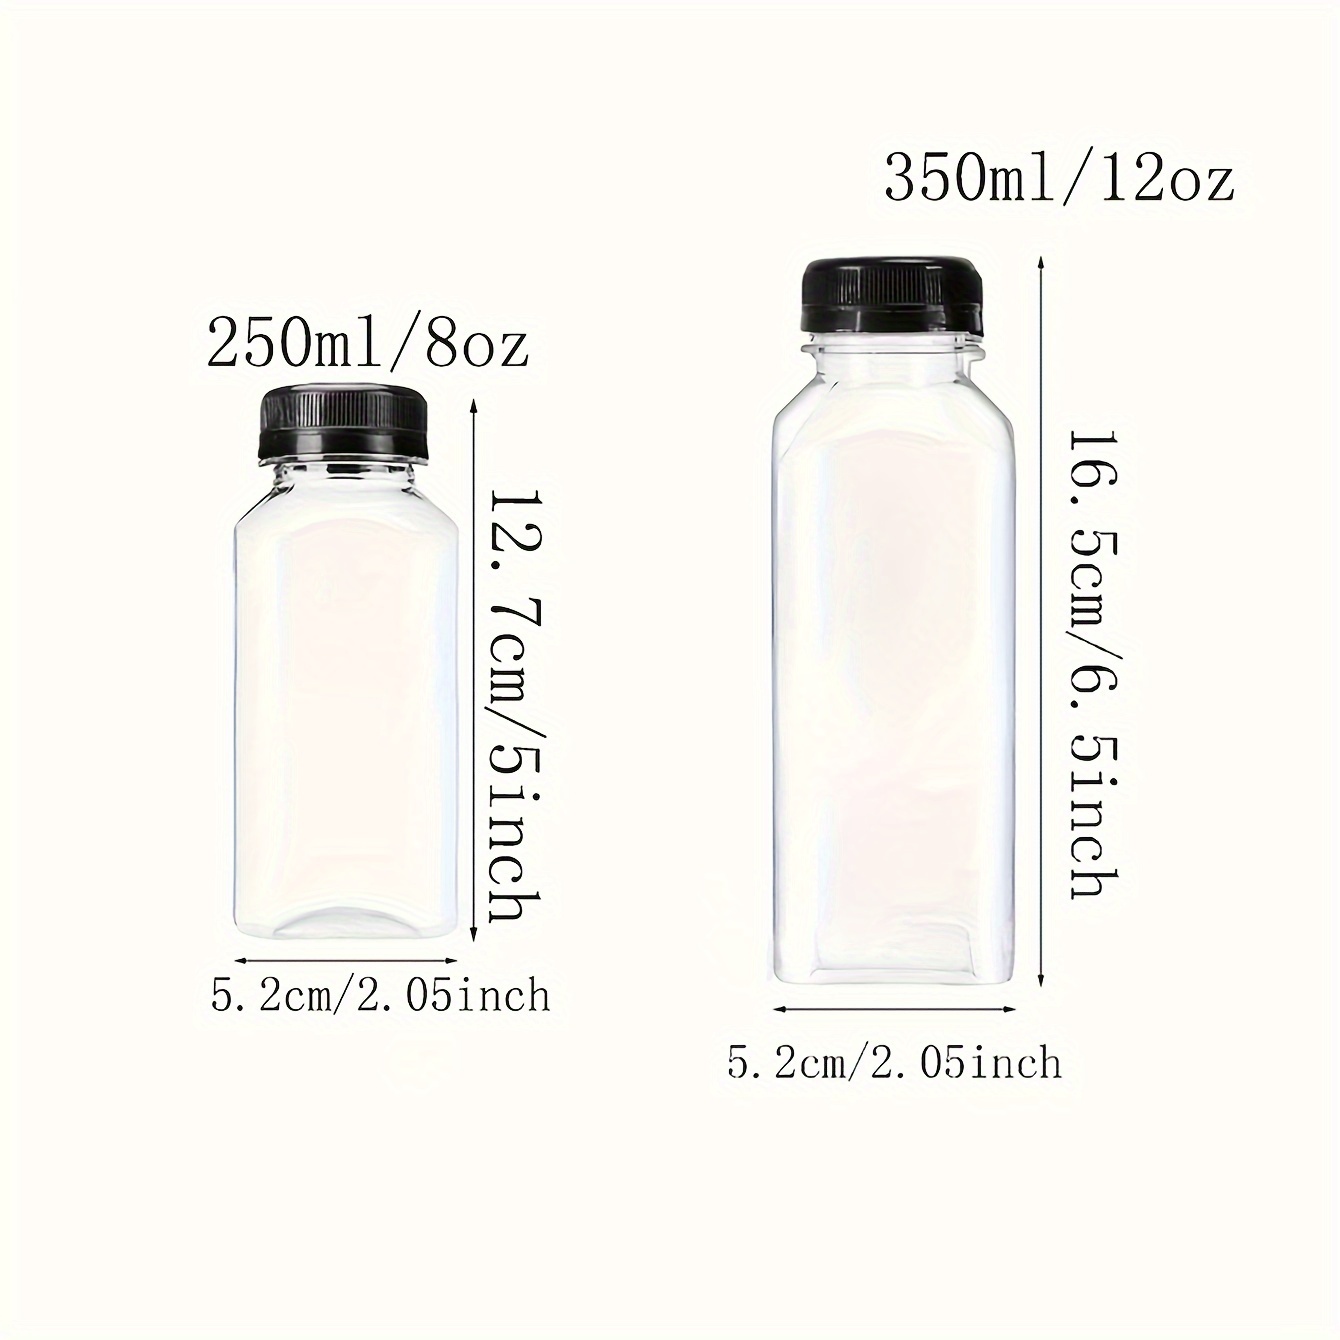 Glass Juice Bottles with Lids